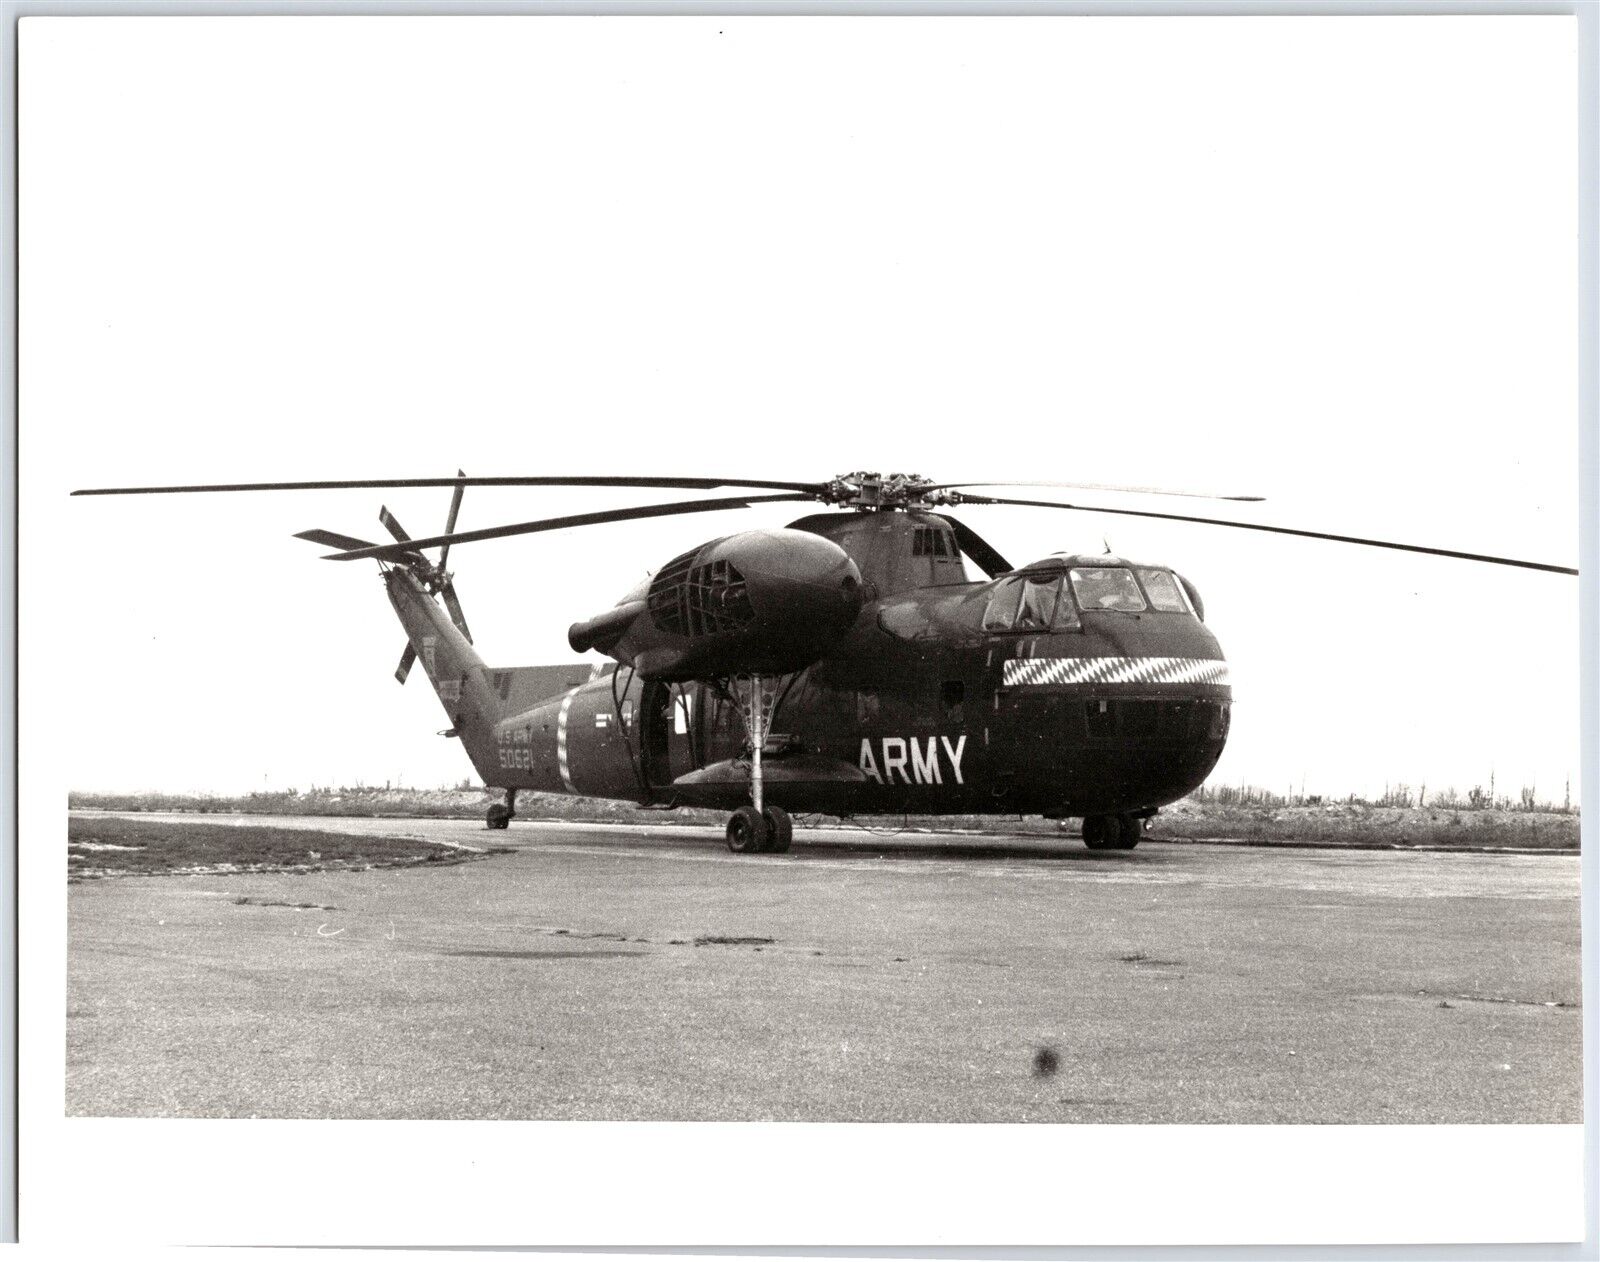 US Army CH-37 Mojave Sikorsky S-56 Military Helicopter Photo B&W 8x10 A2